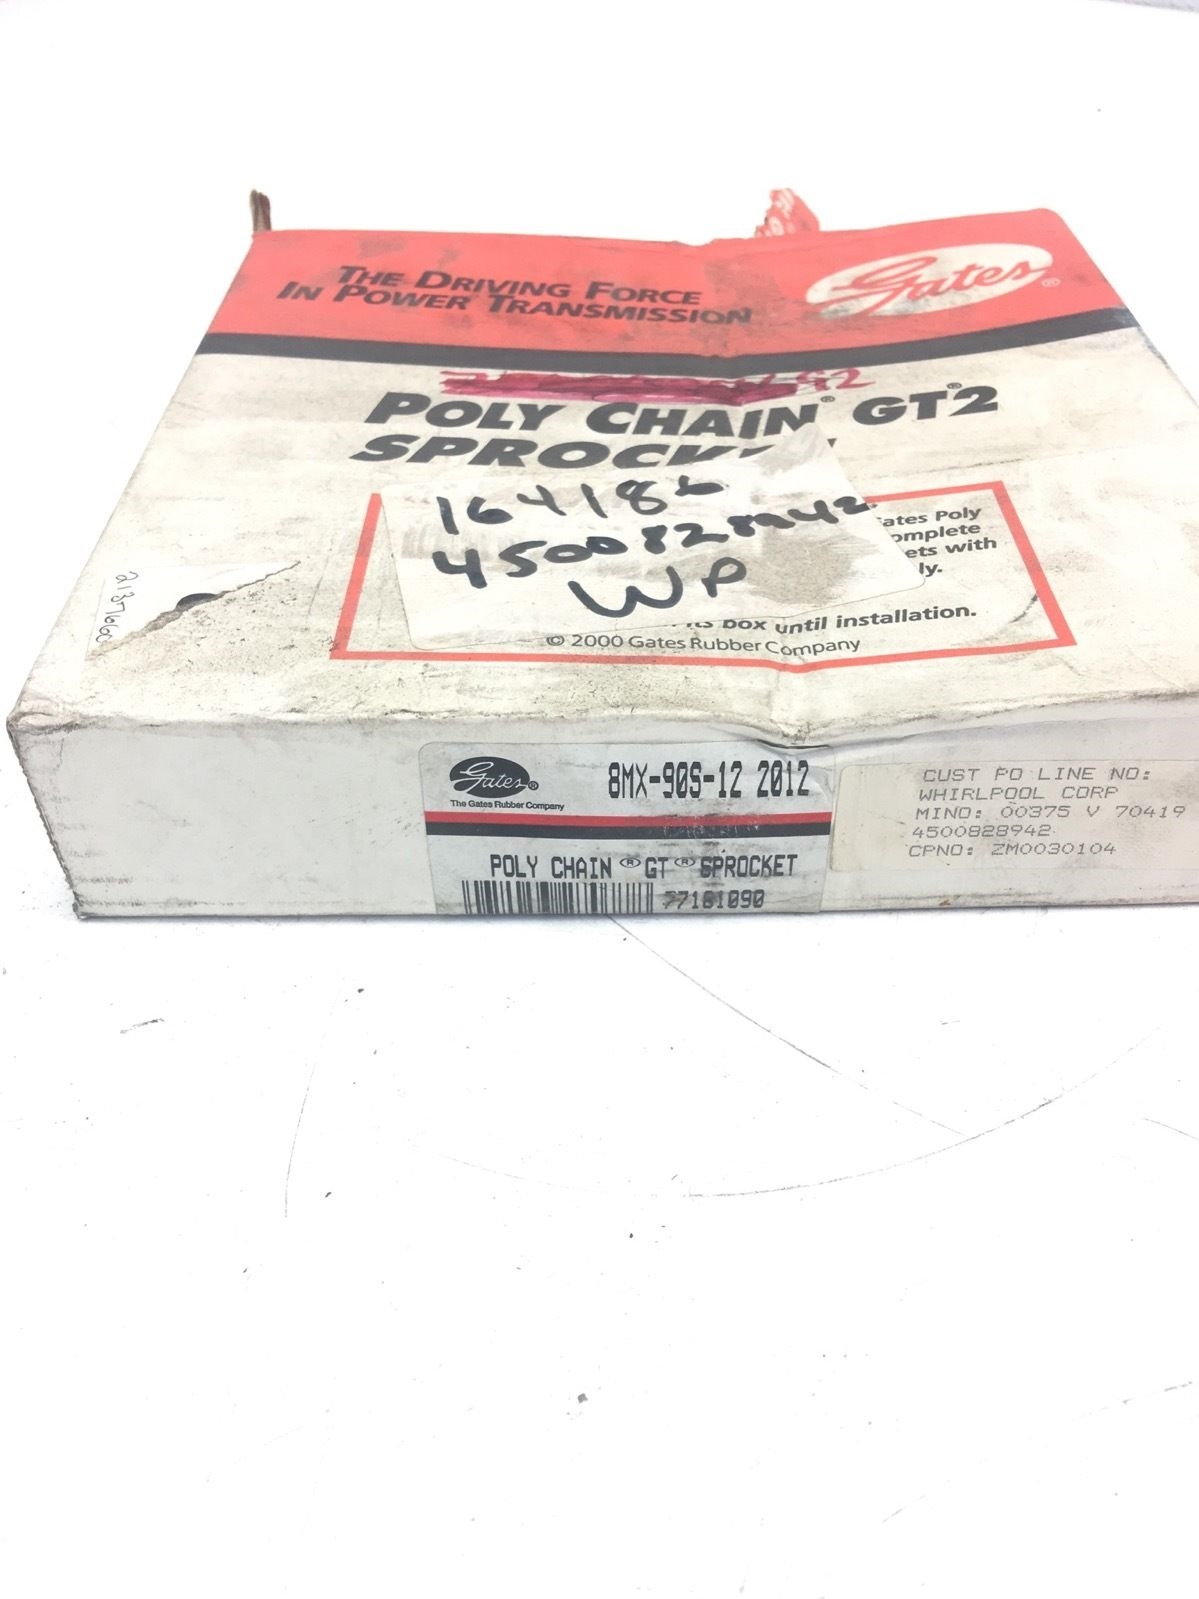 NEW IN BOX GATES TIMING SPROCKET, 8MX-90S-12 2012, POLY CHAIN GT2, (B275) 1